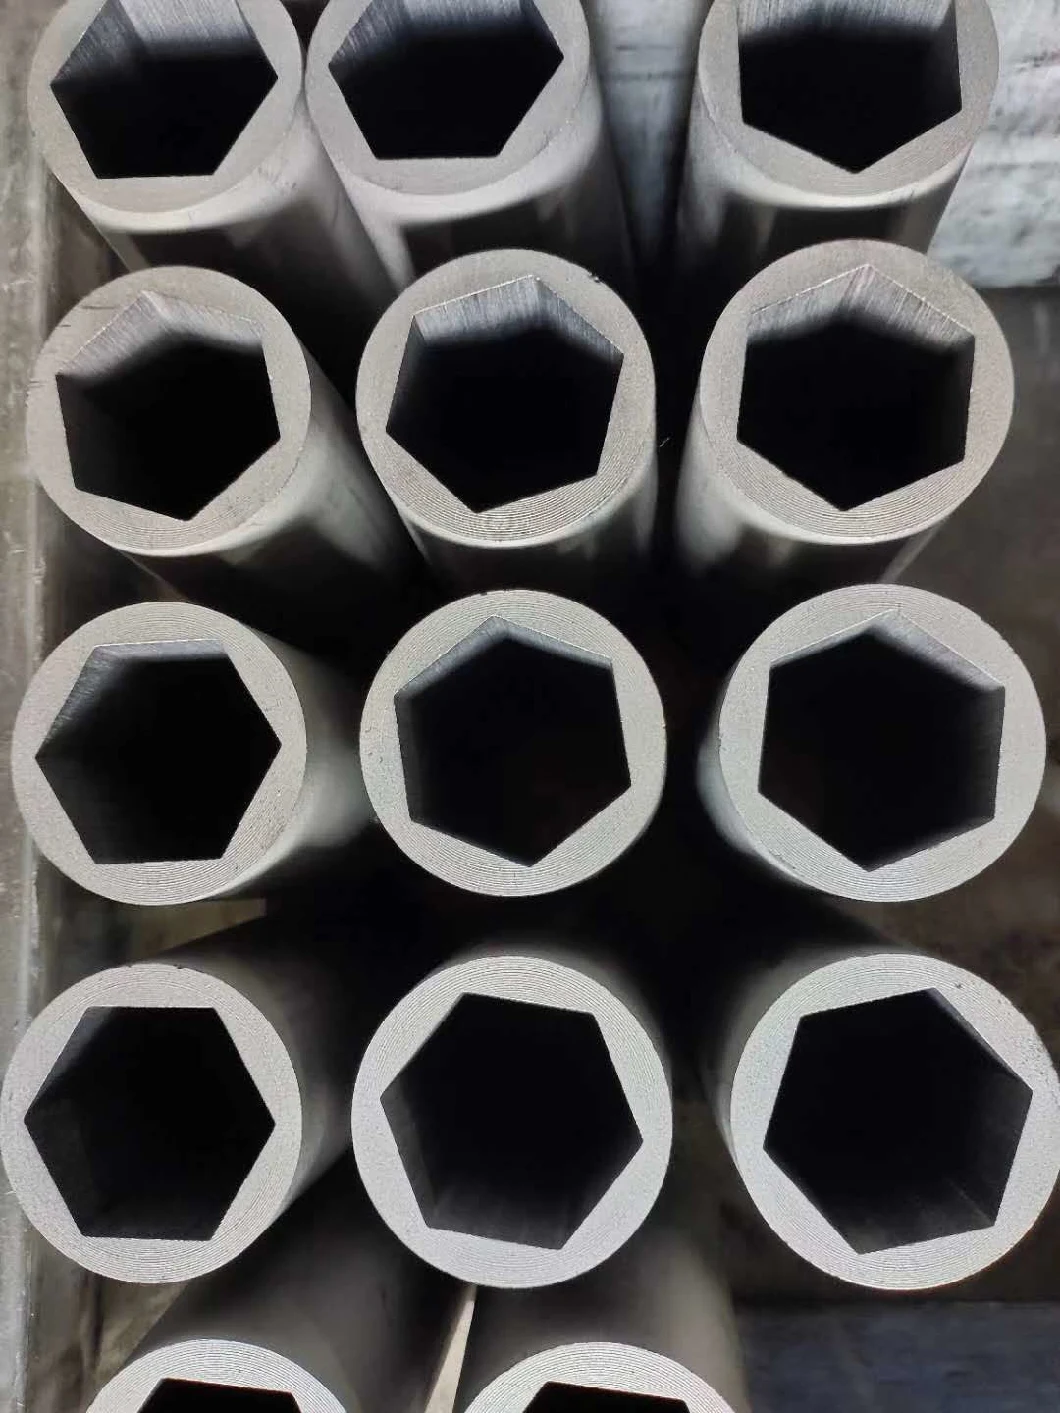 Graphite Molds Dies for Casting Area